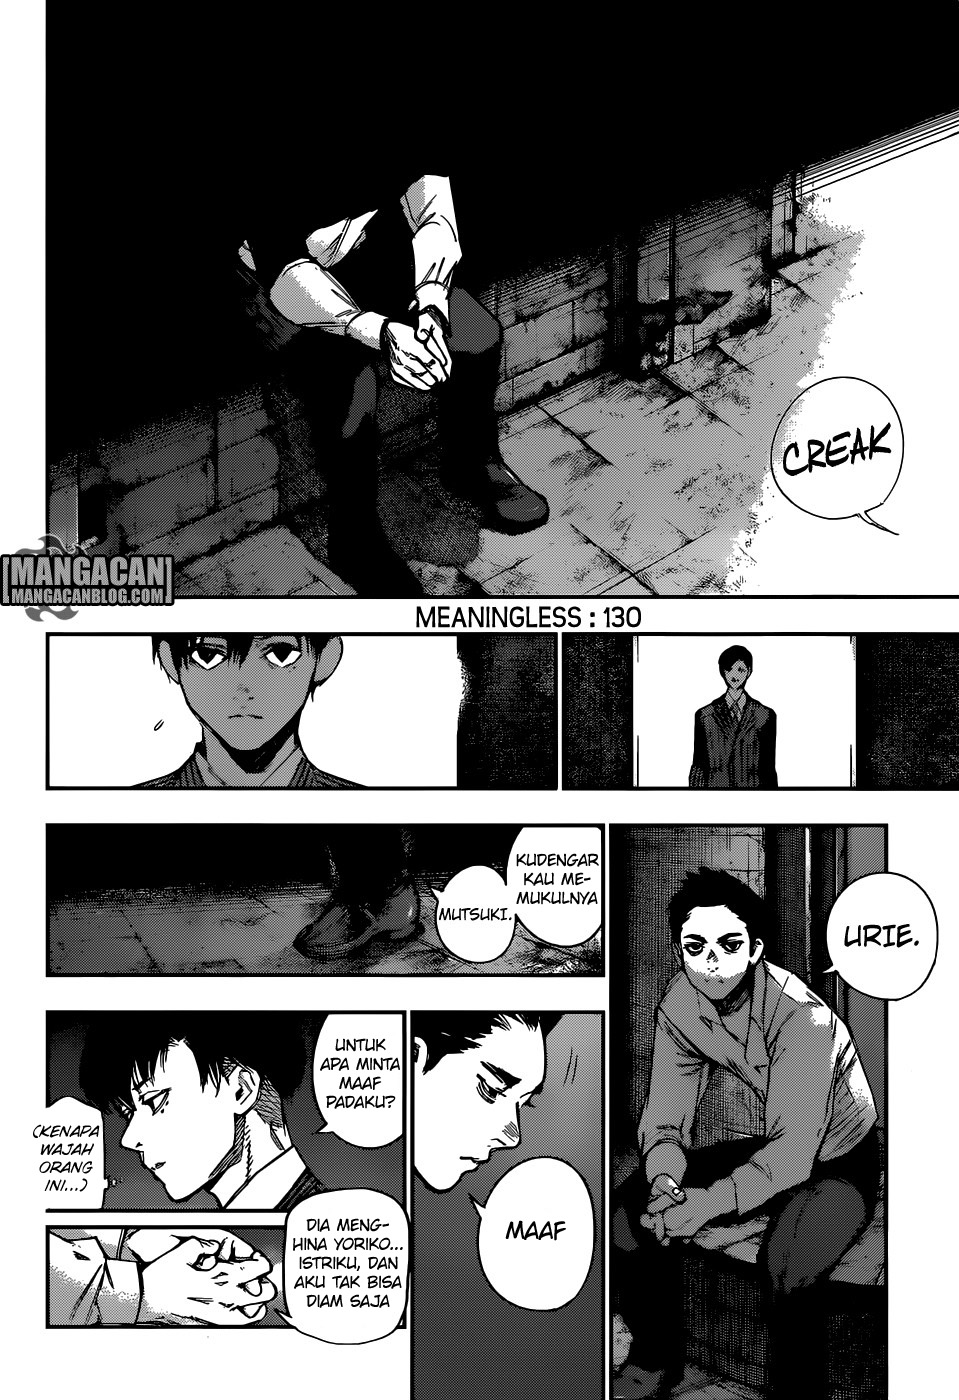 Tokyo Ghoul:re Chapter 130